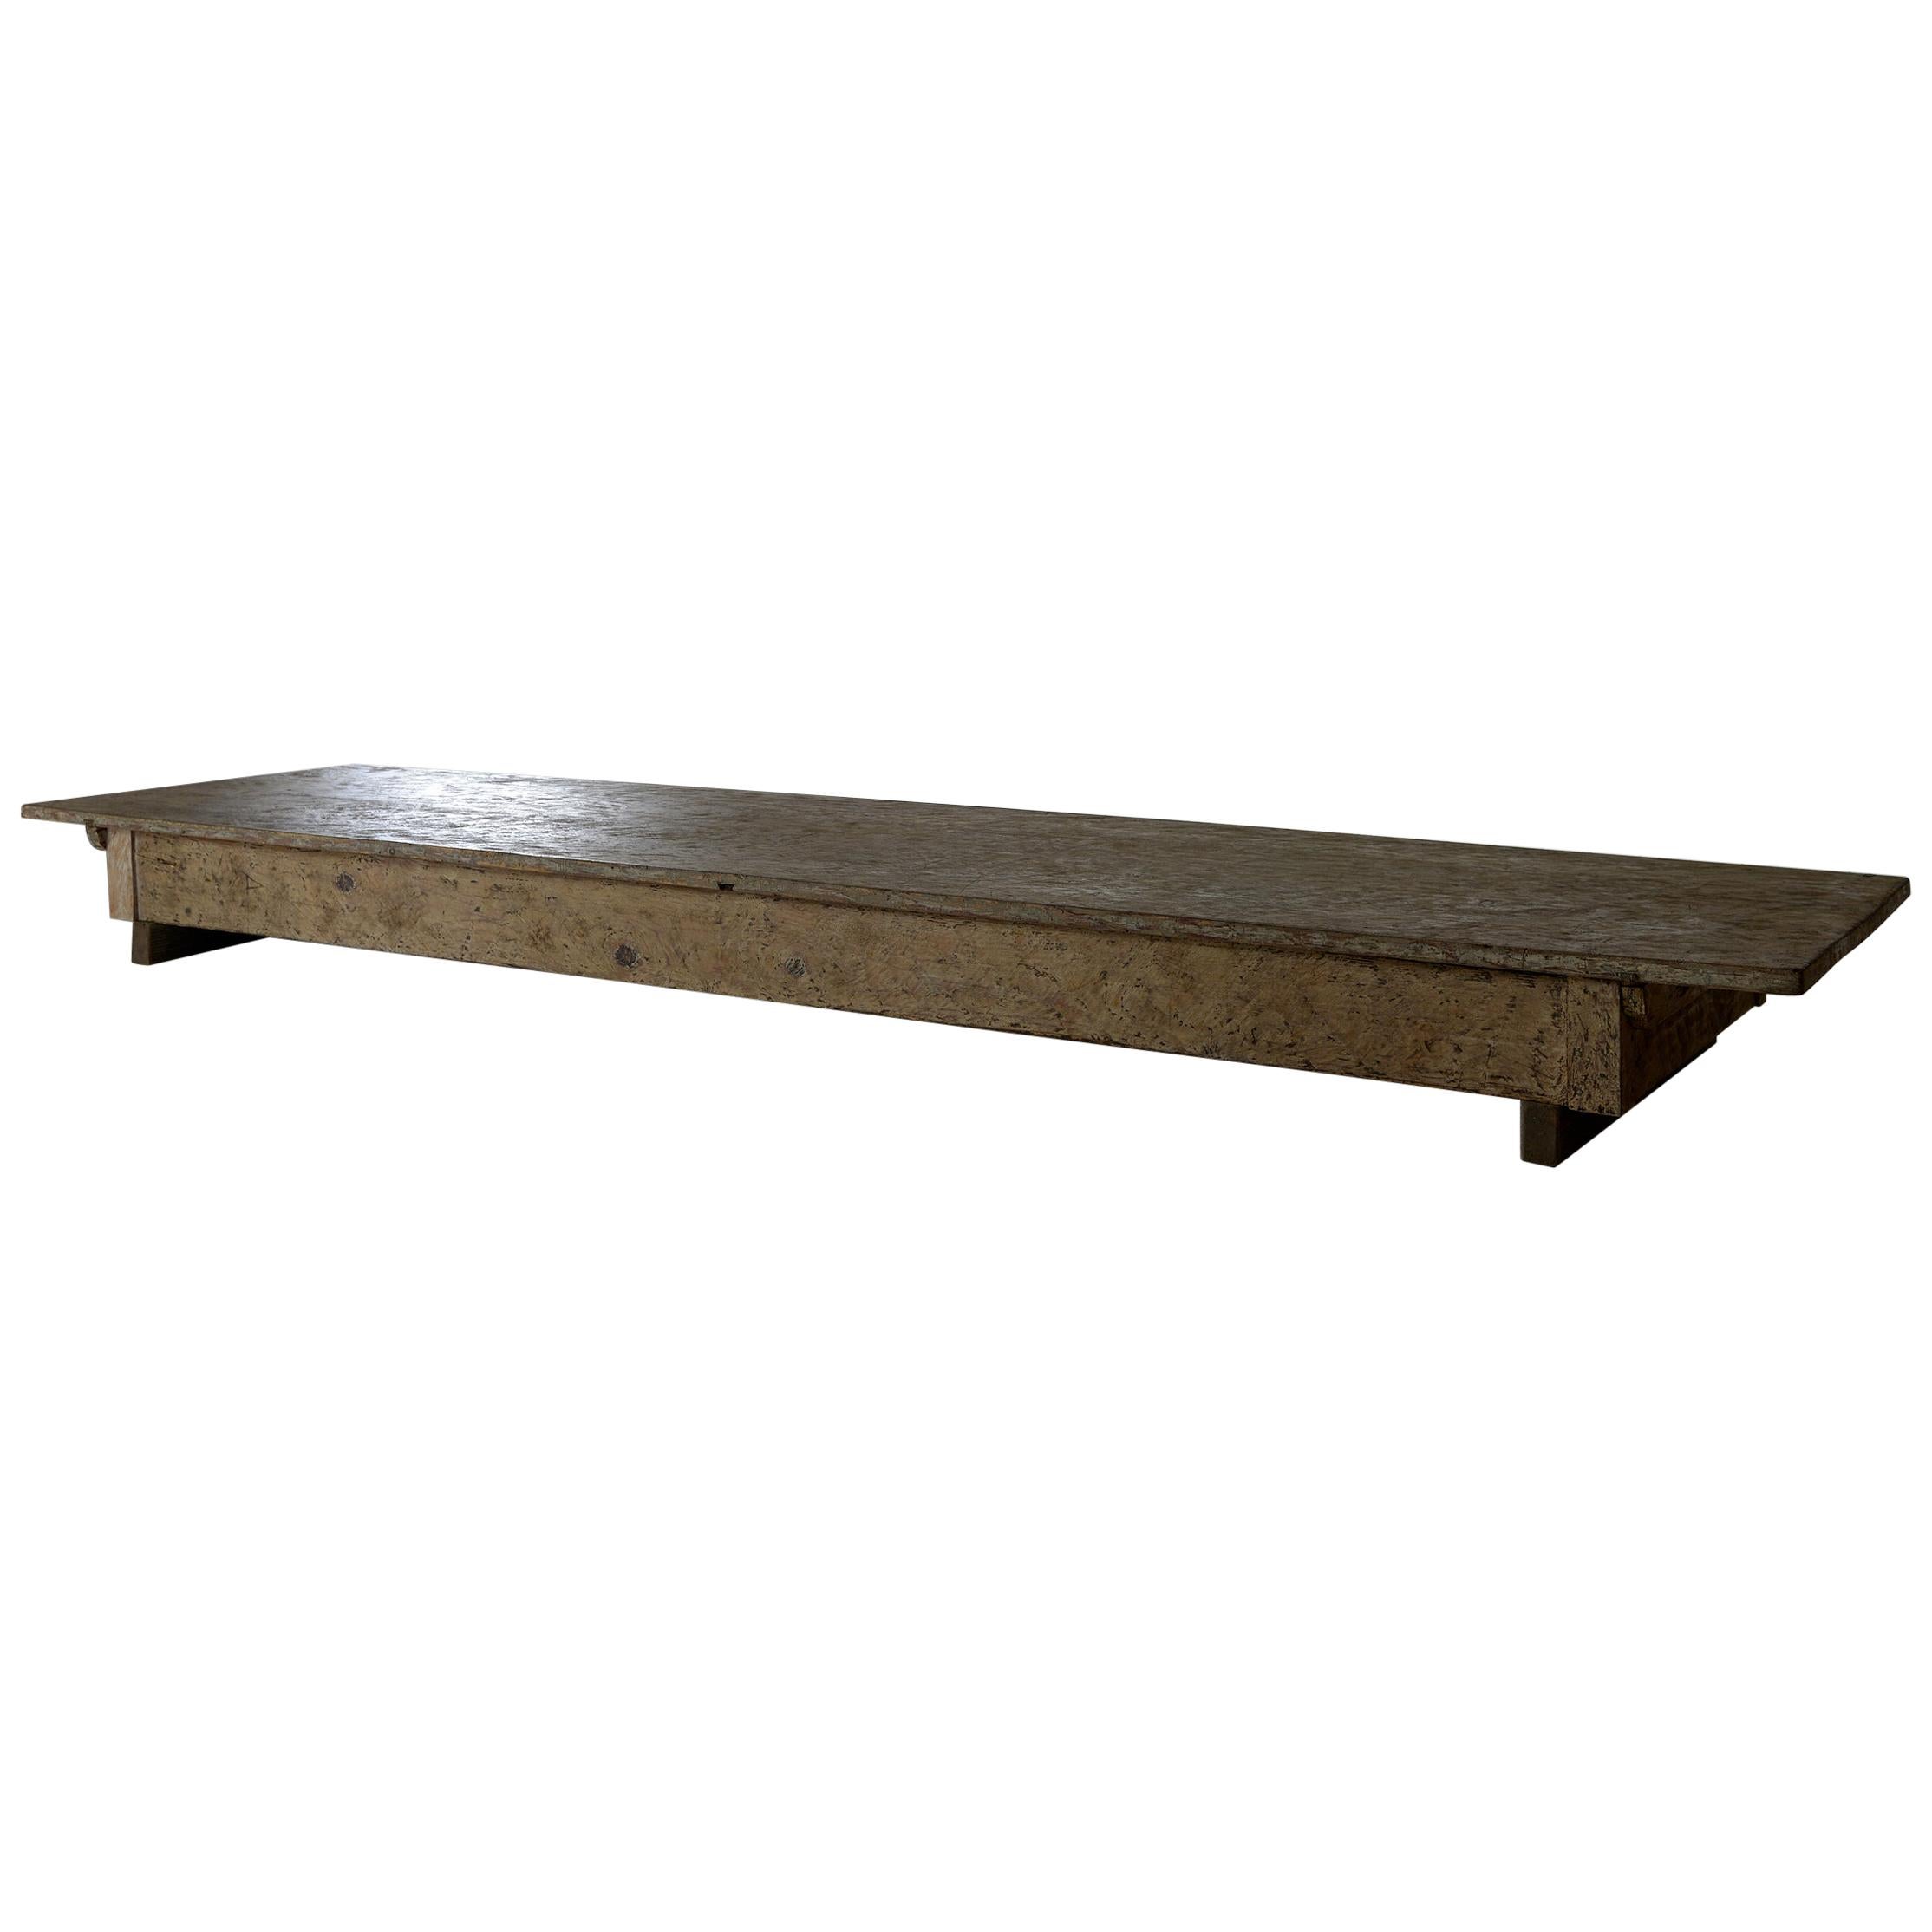 Very Wabi Sabi Low Coffee Table Made from a Farmhouse Table, Original Paint